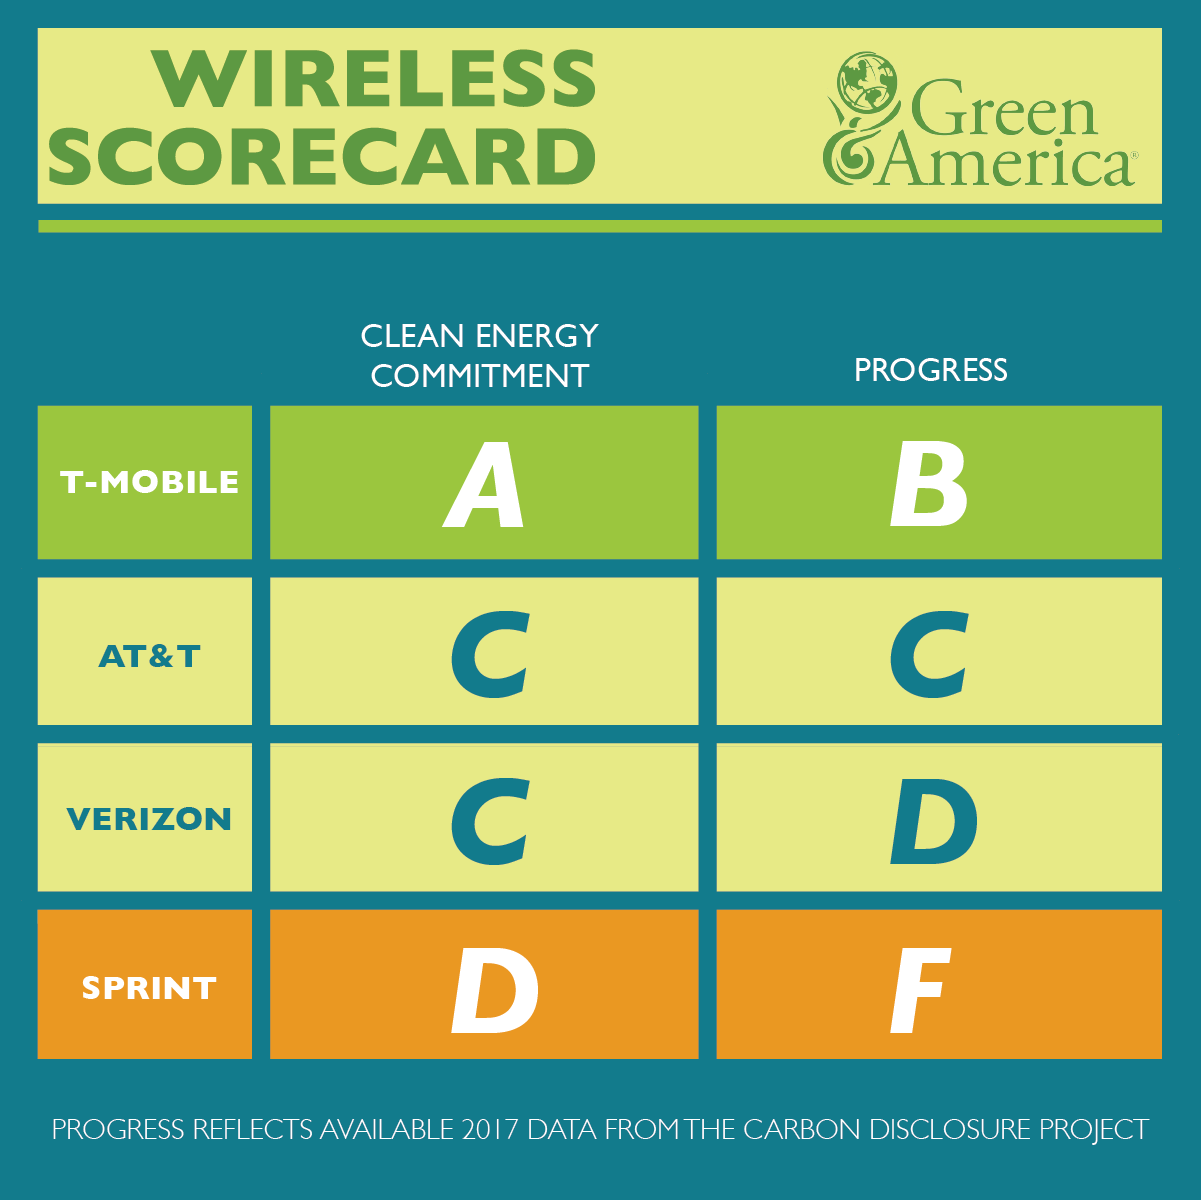 Green America 2019 Wireless Scorecard, T-mobile receives an A for commitment to clean energy and a B for progress. AT&T has a C for commitment and C for progress. Verizon has a C for commitment and a D on progress. Sprint has a D for commitment and an F on progress. 